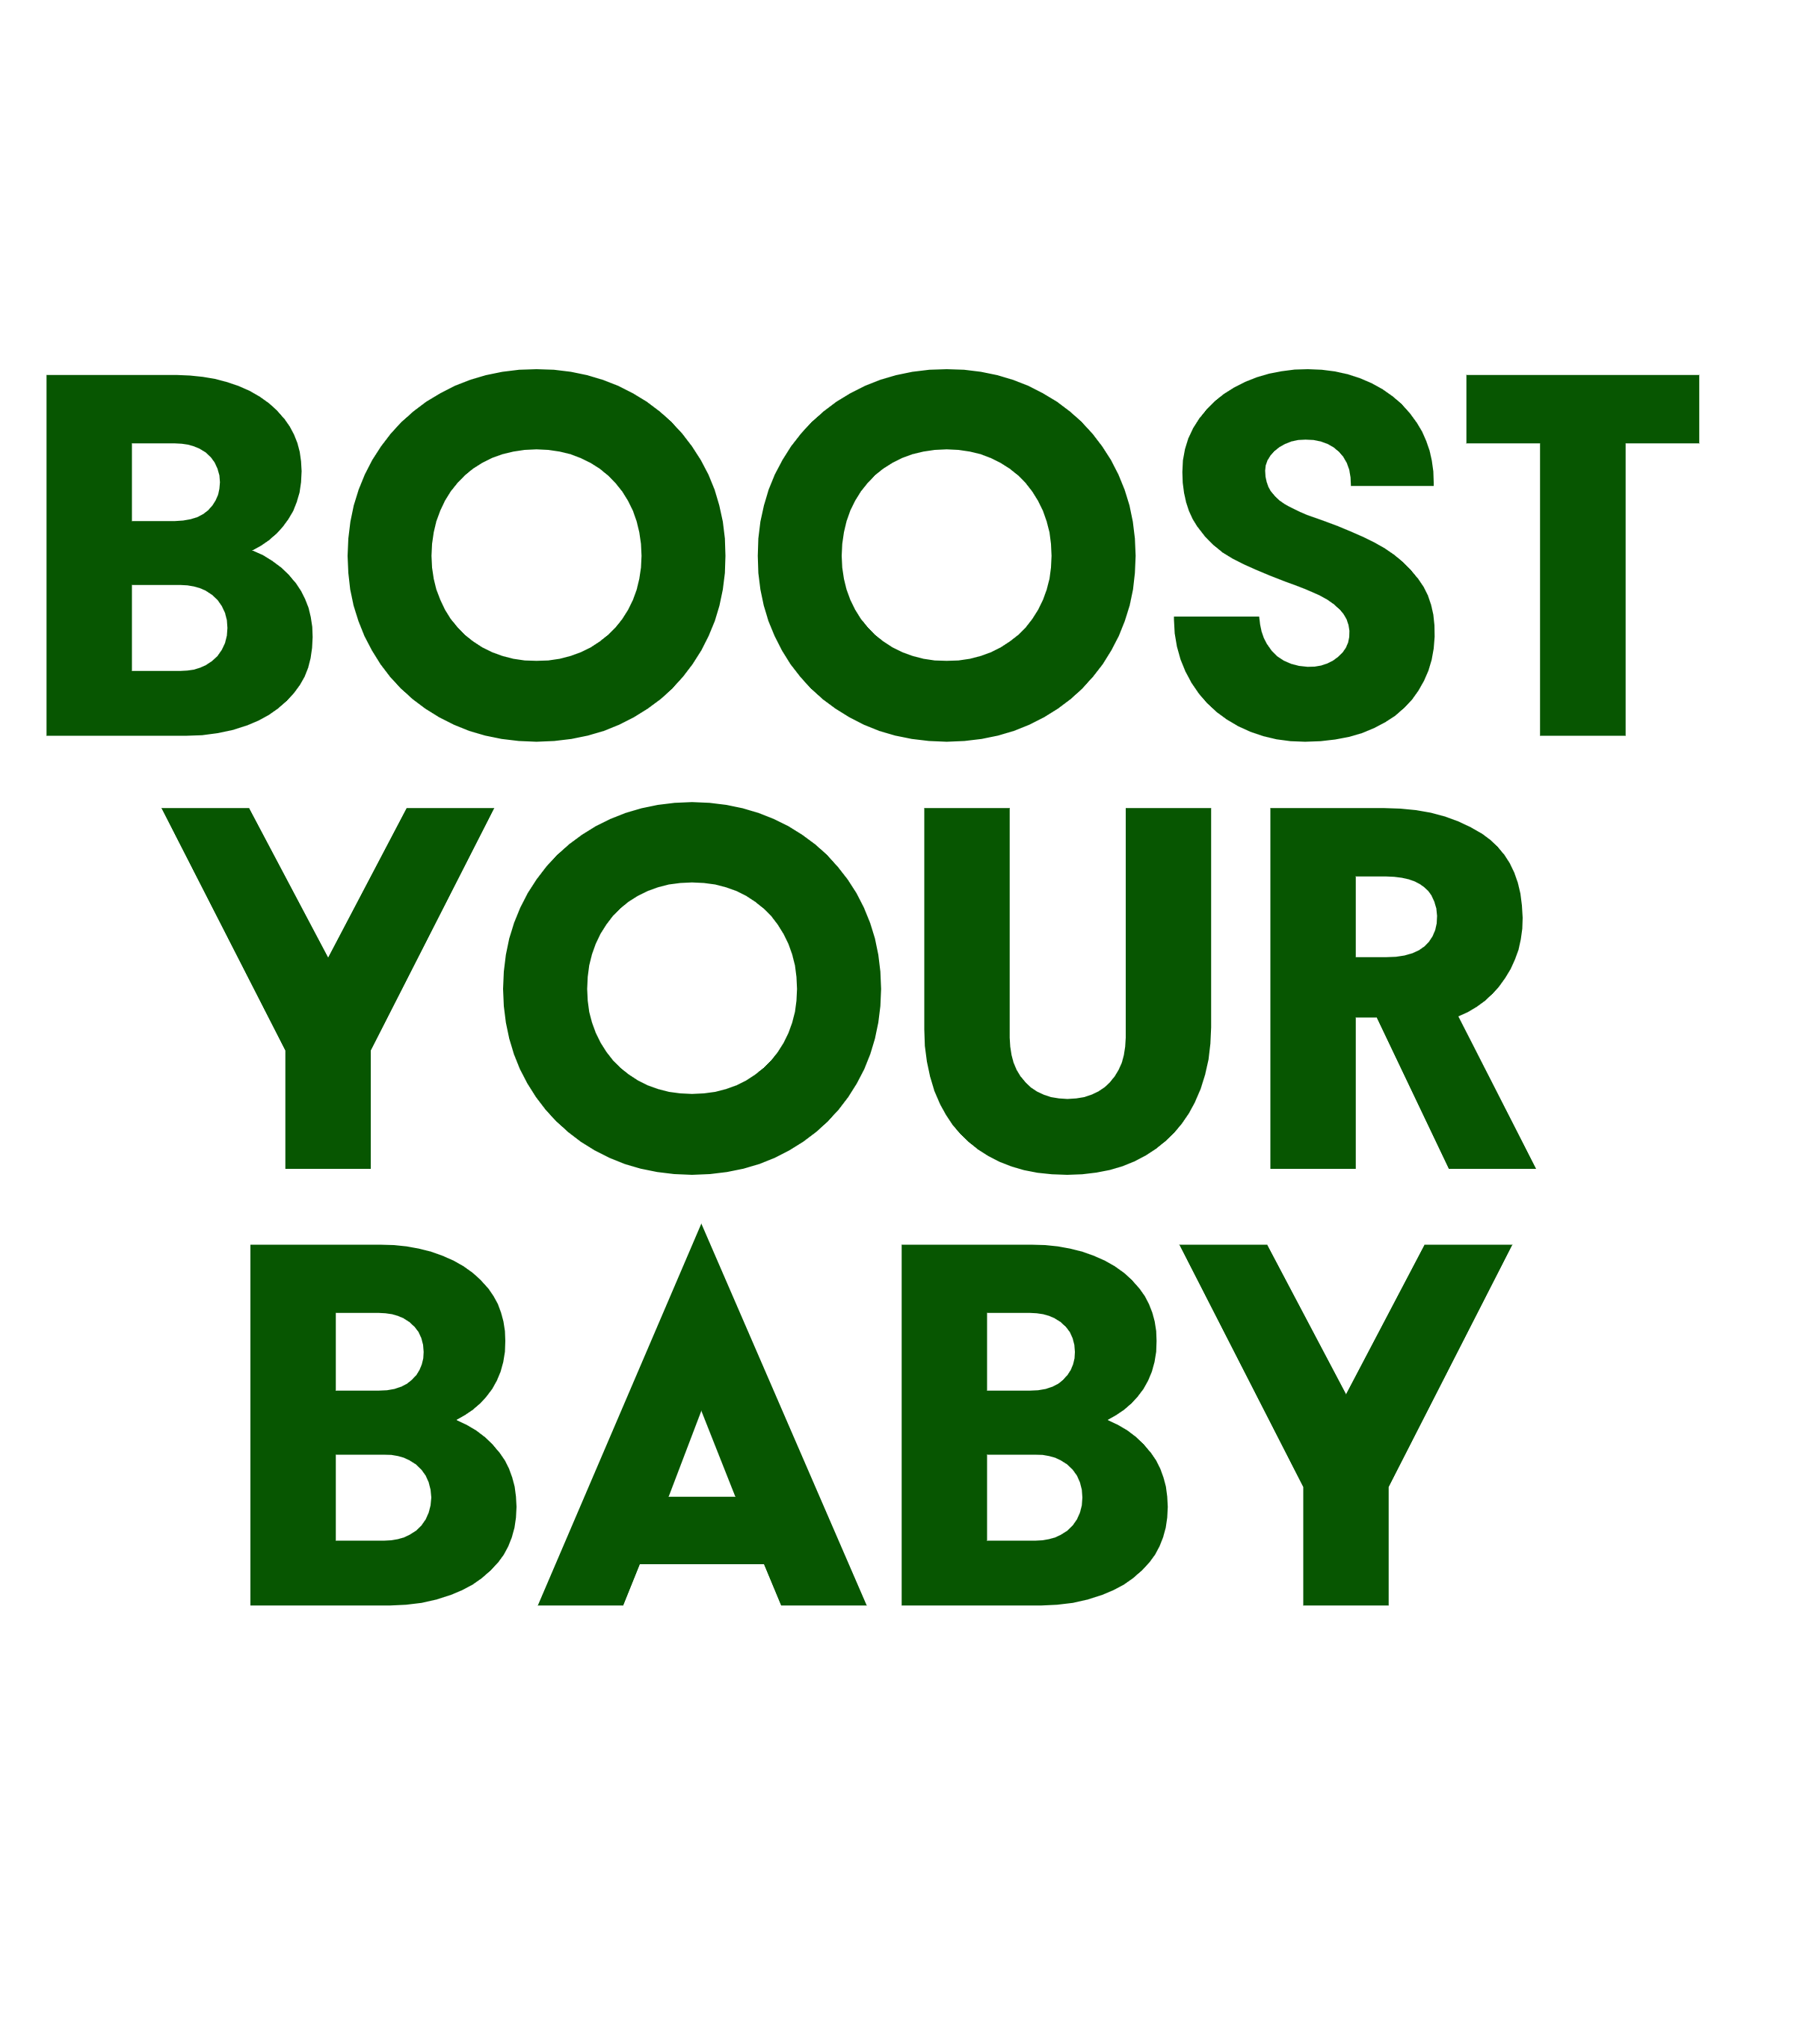 Boost Your Baby